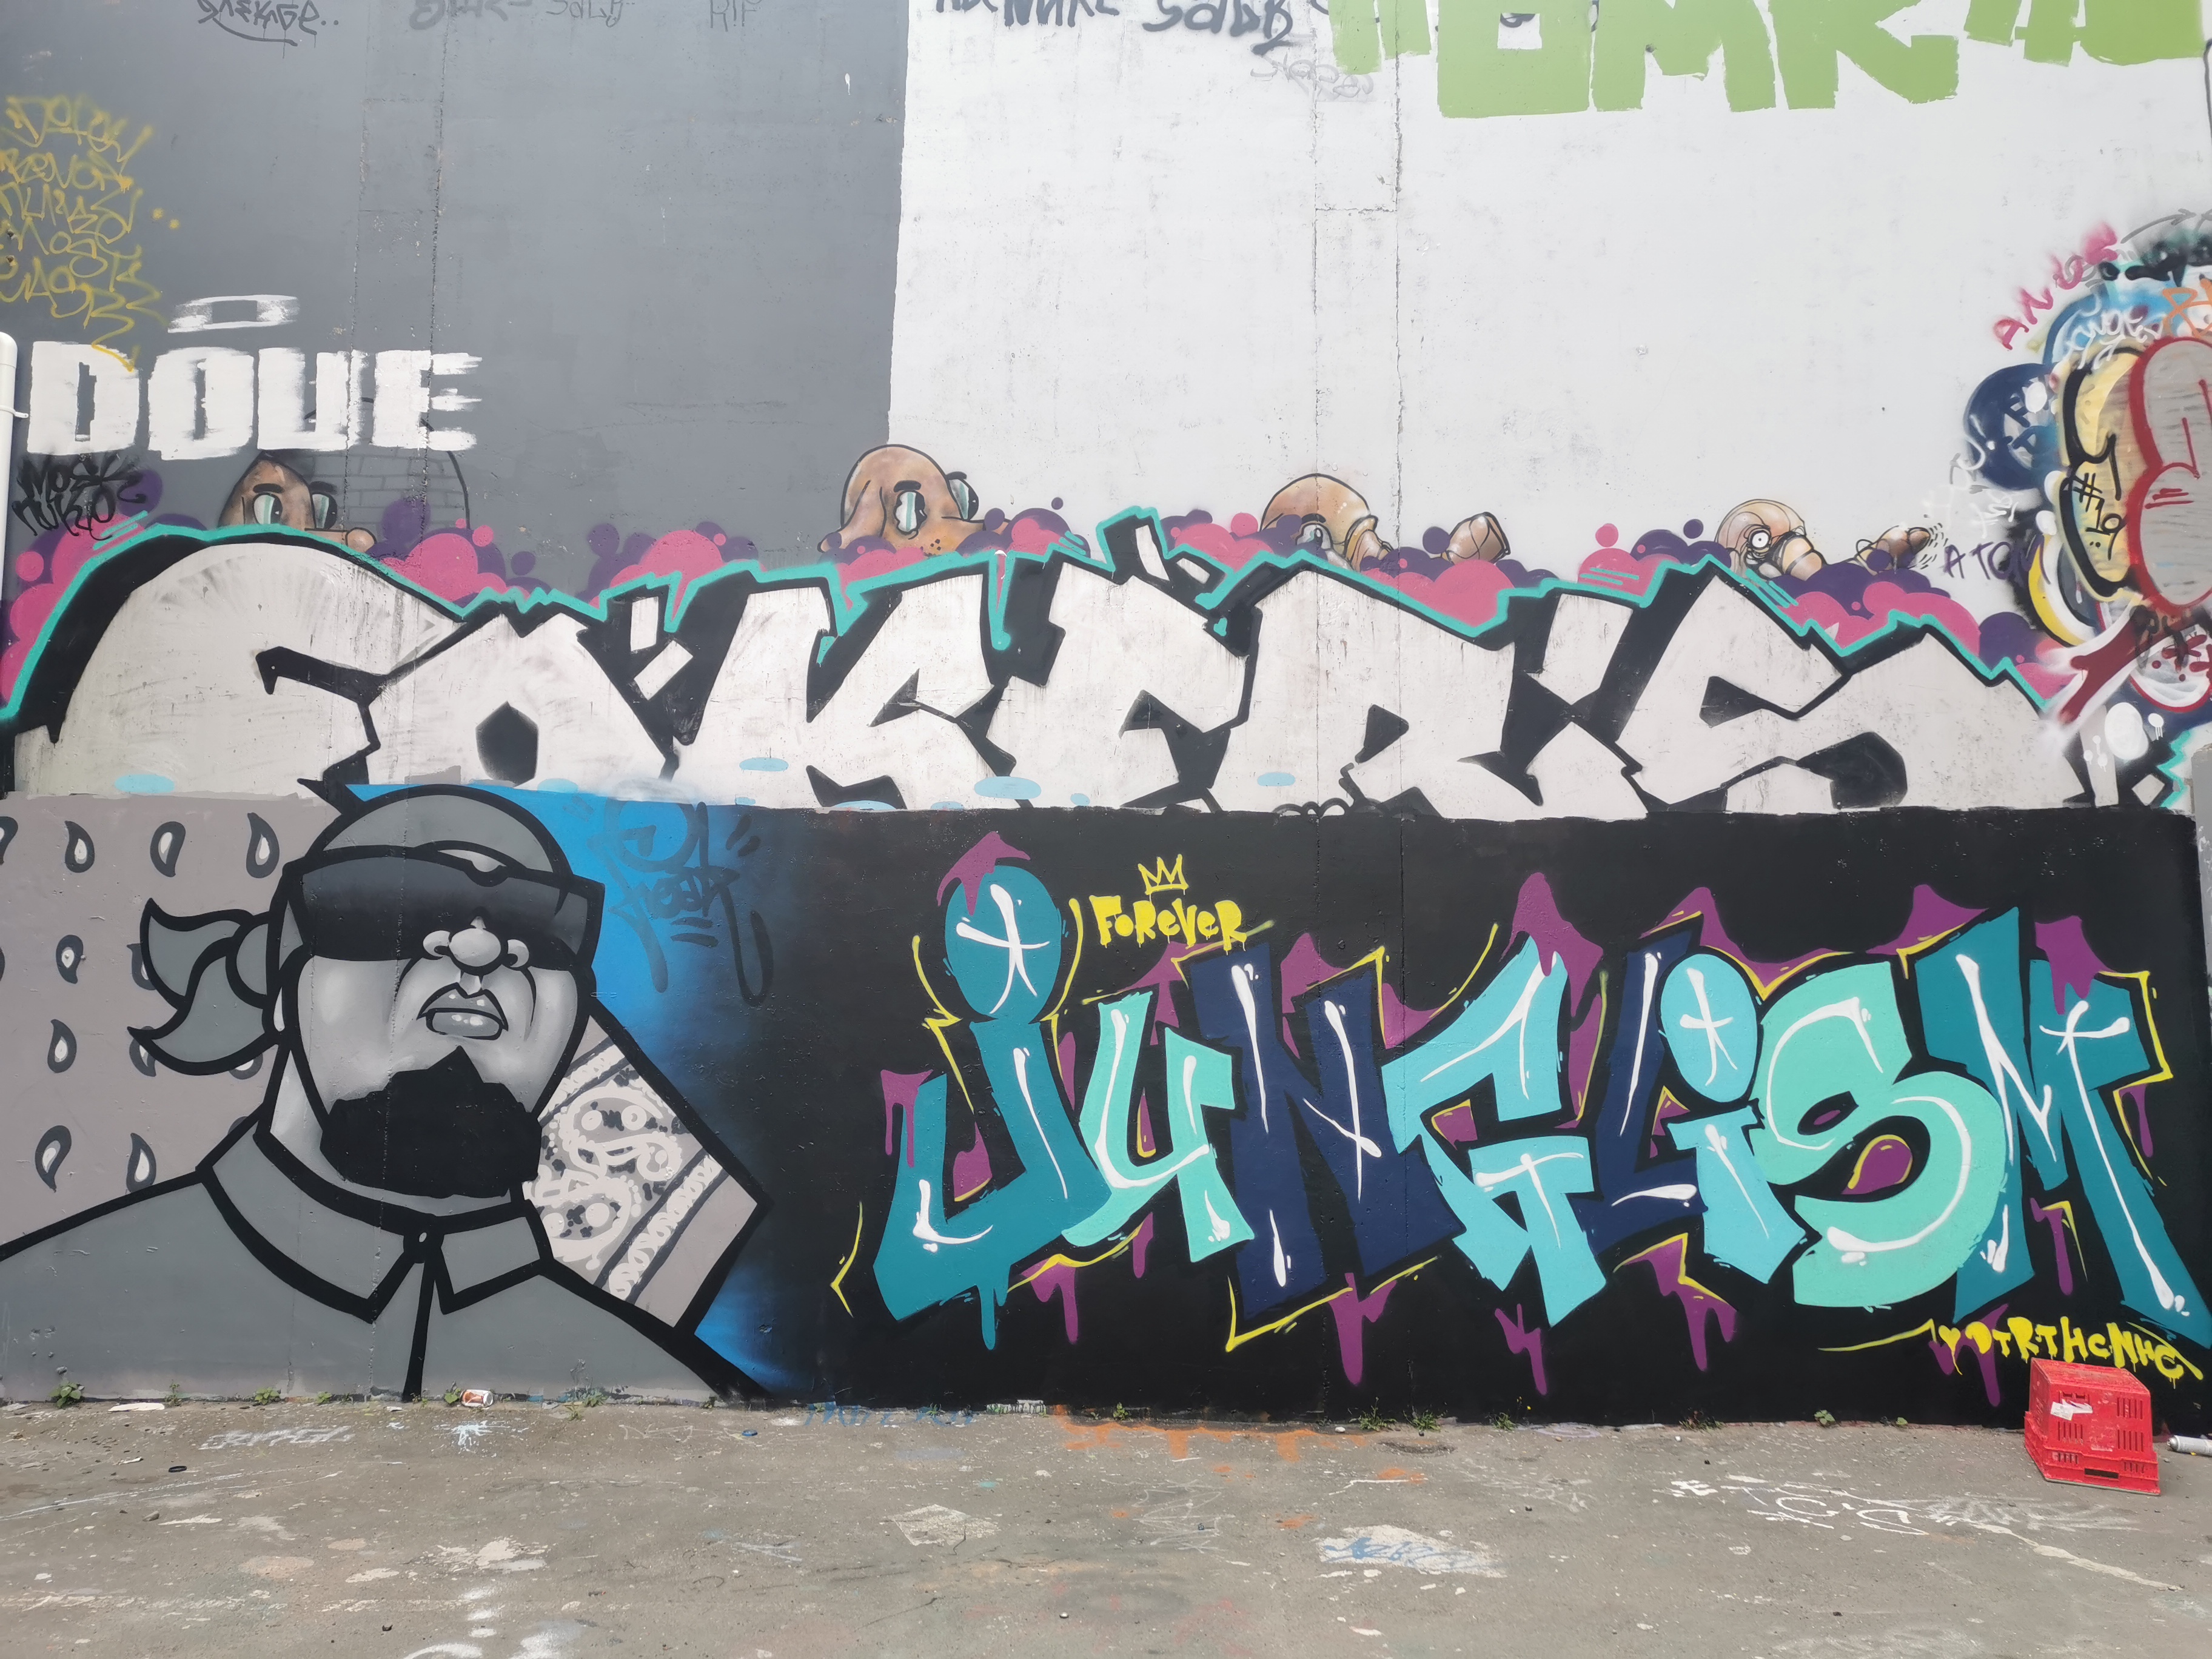 Junglism piece by Ikarus and a portrait of Jungle by Freak, Christchurch, 2020.